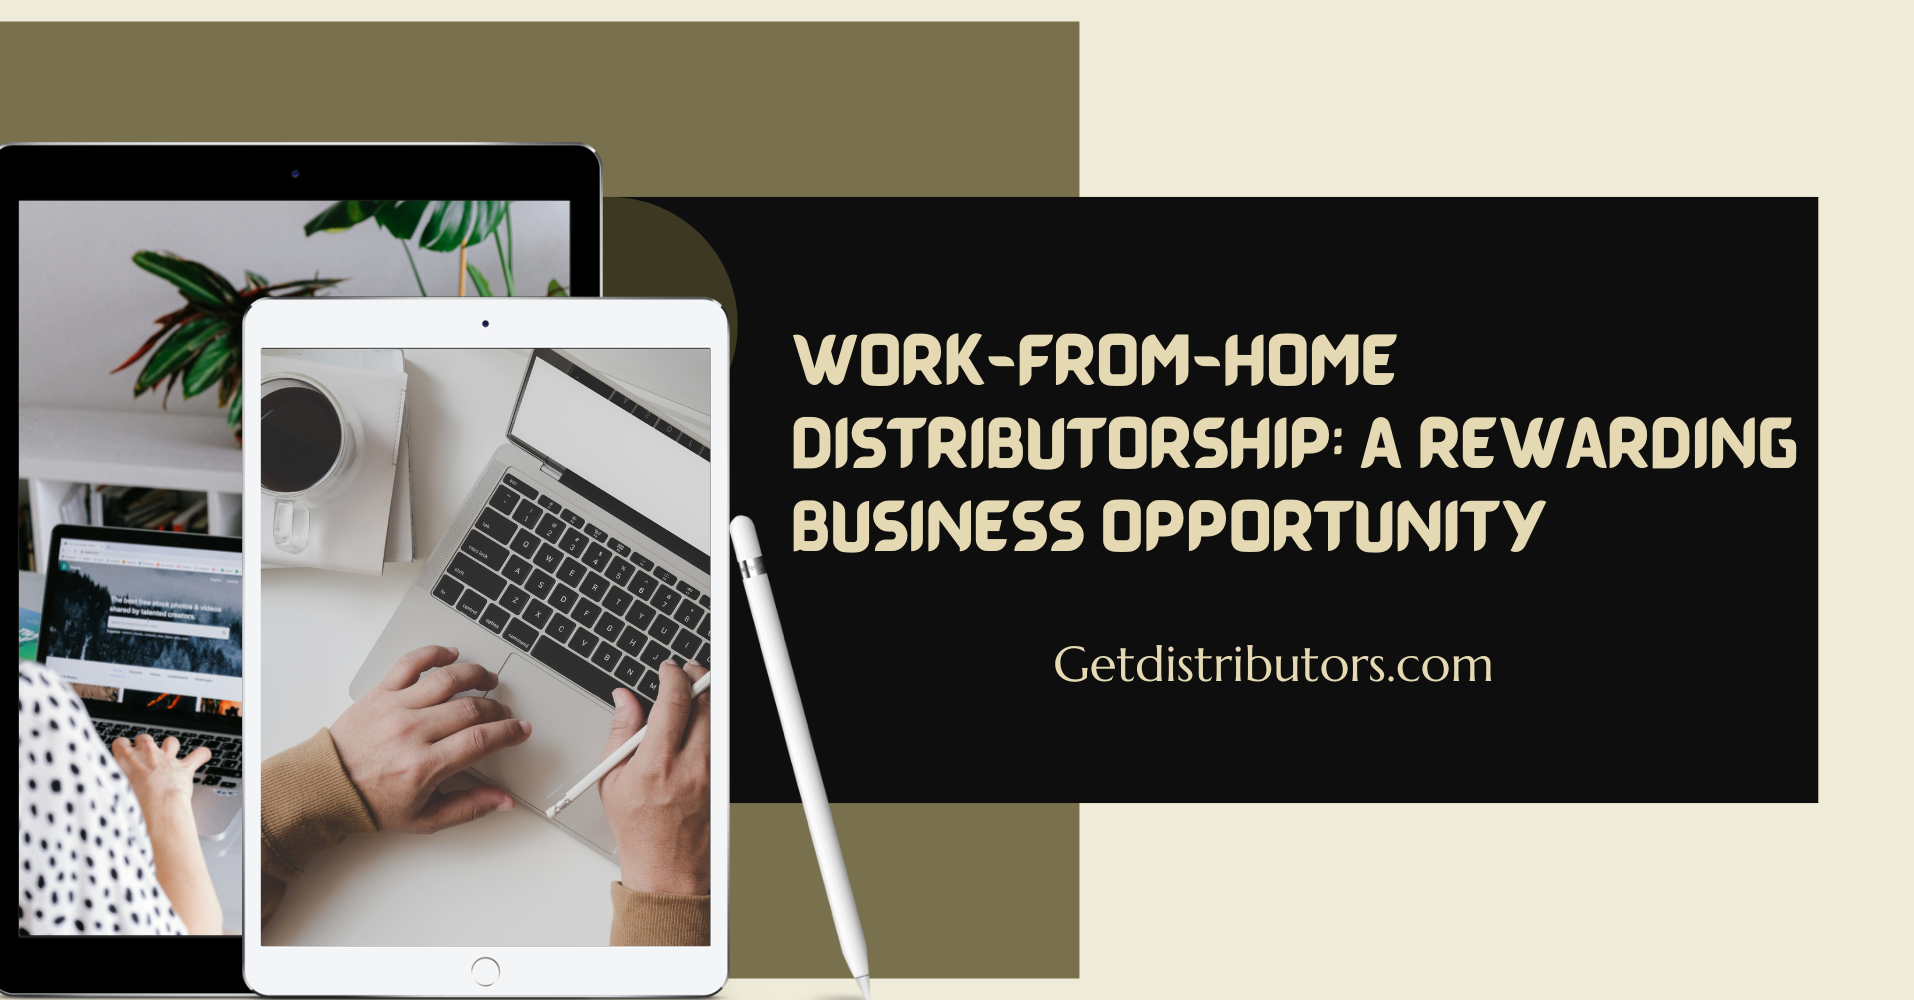 Work-from-Home Distributorship: A rewarding business opportunity